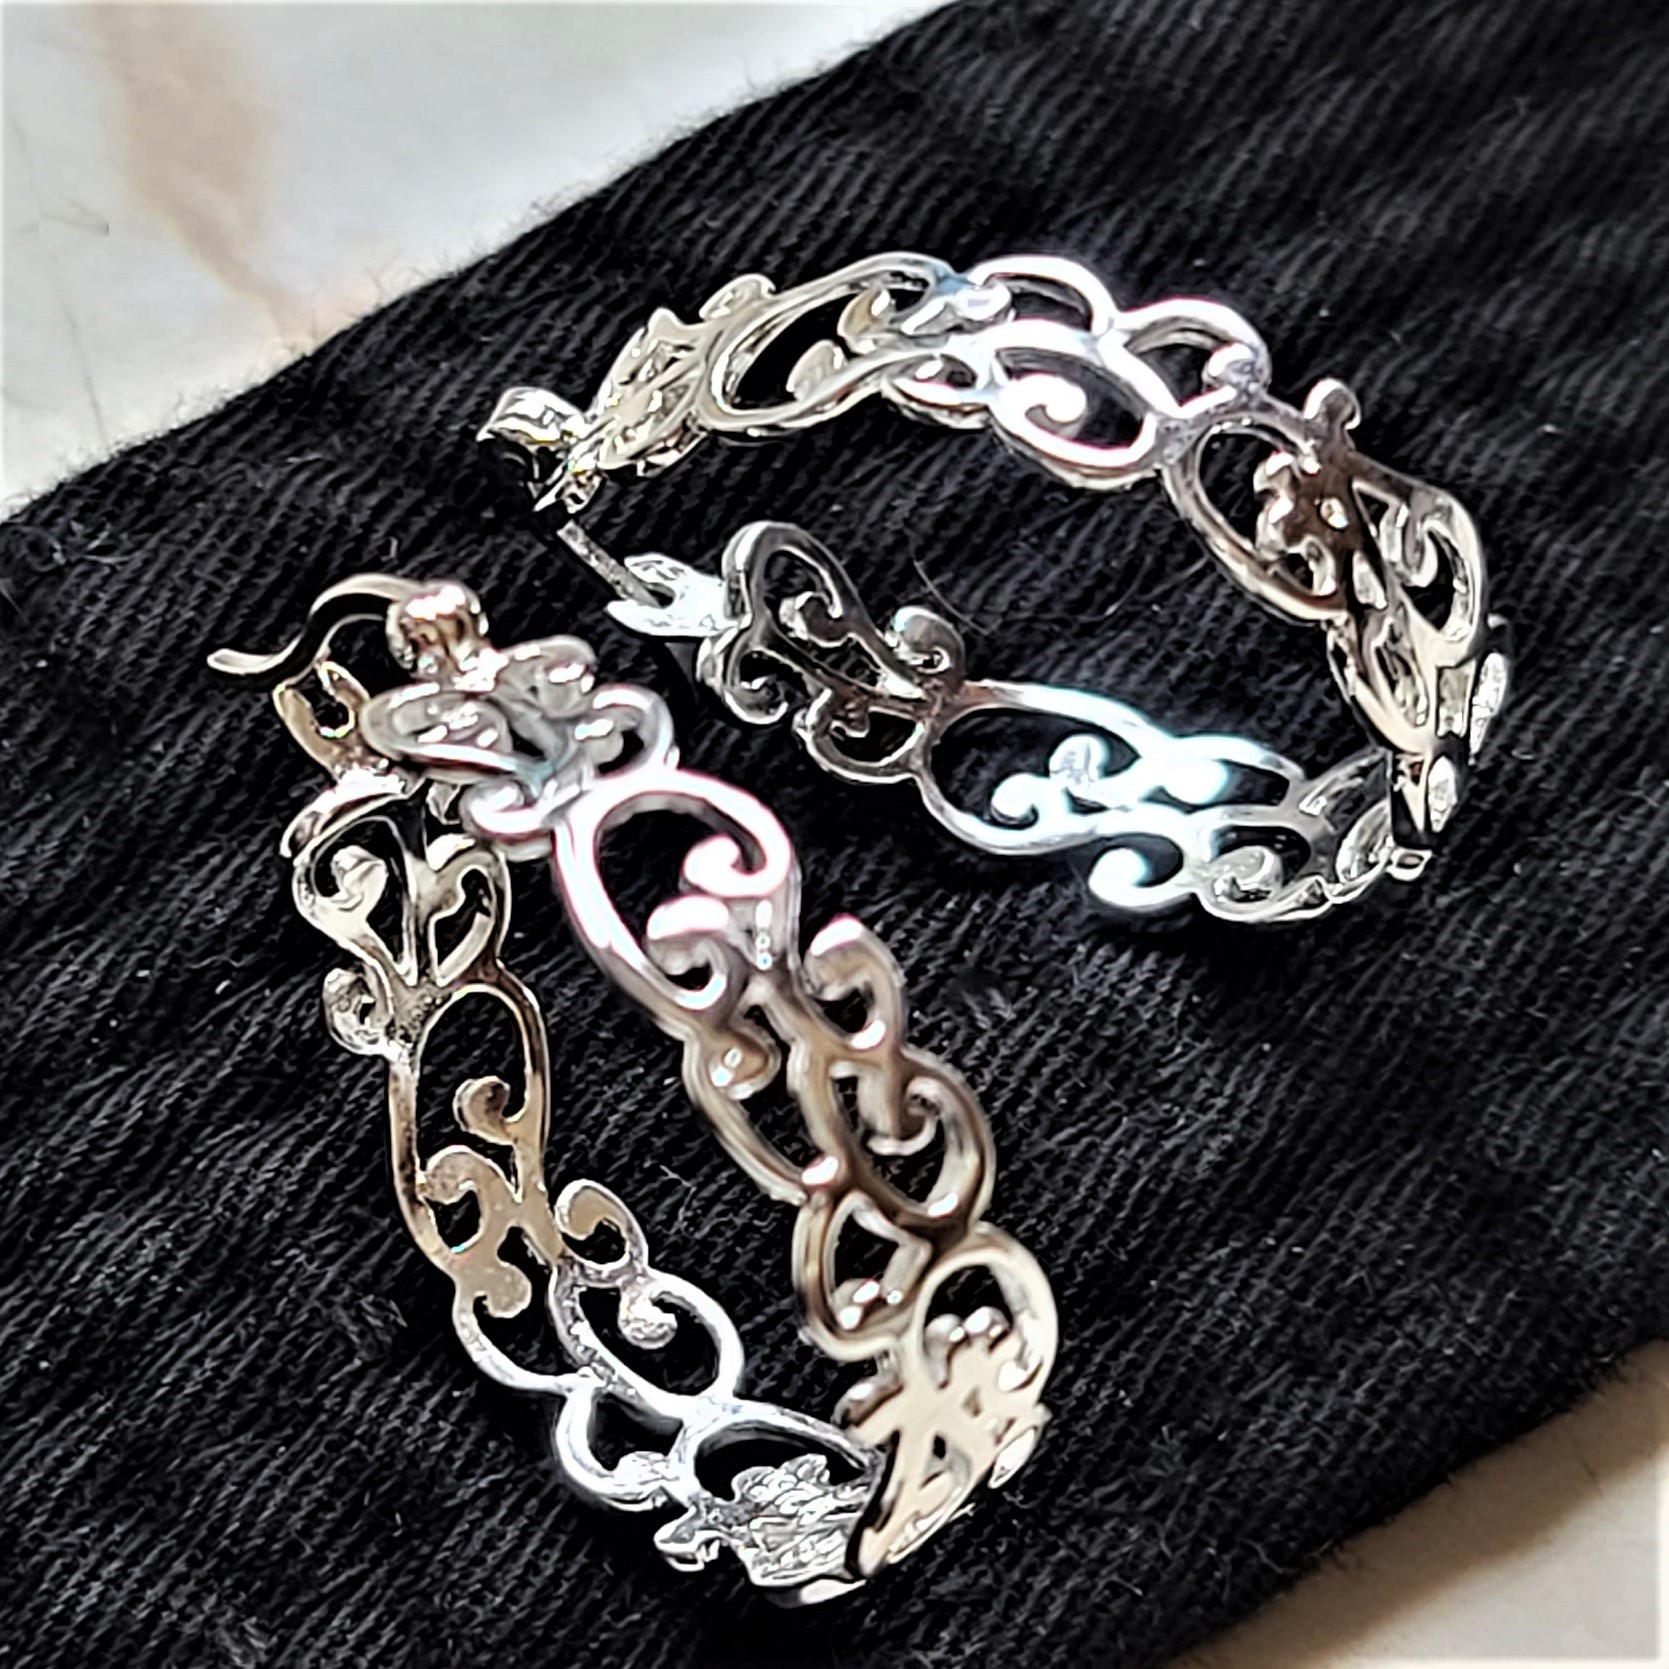 Lace Oval Hoop Earrings 925 Sterling Silver - Click Image to Close